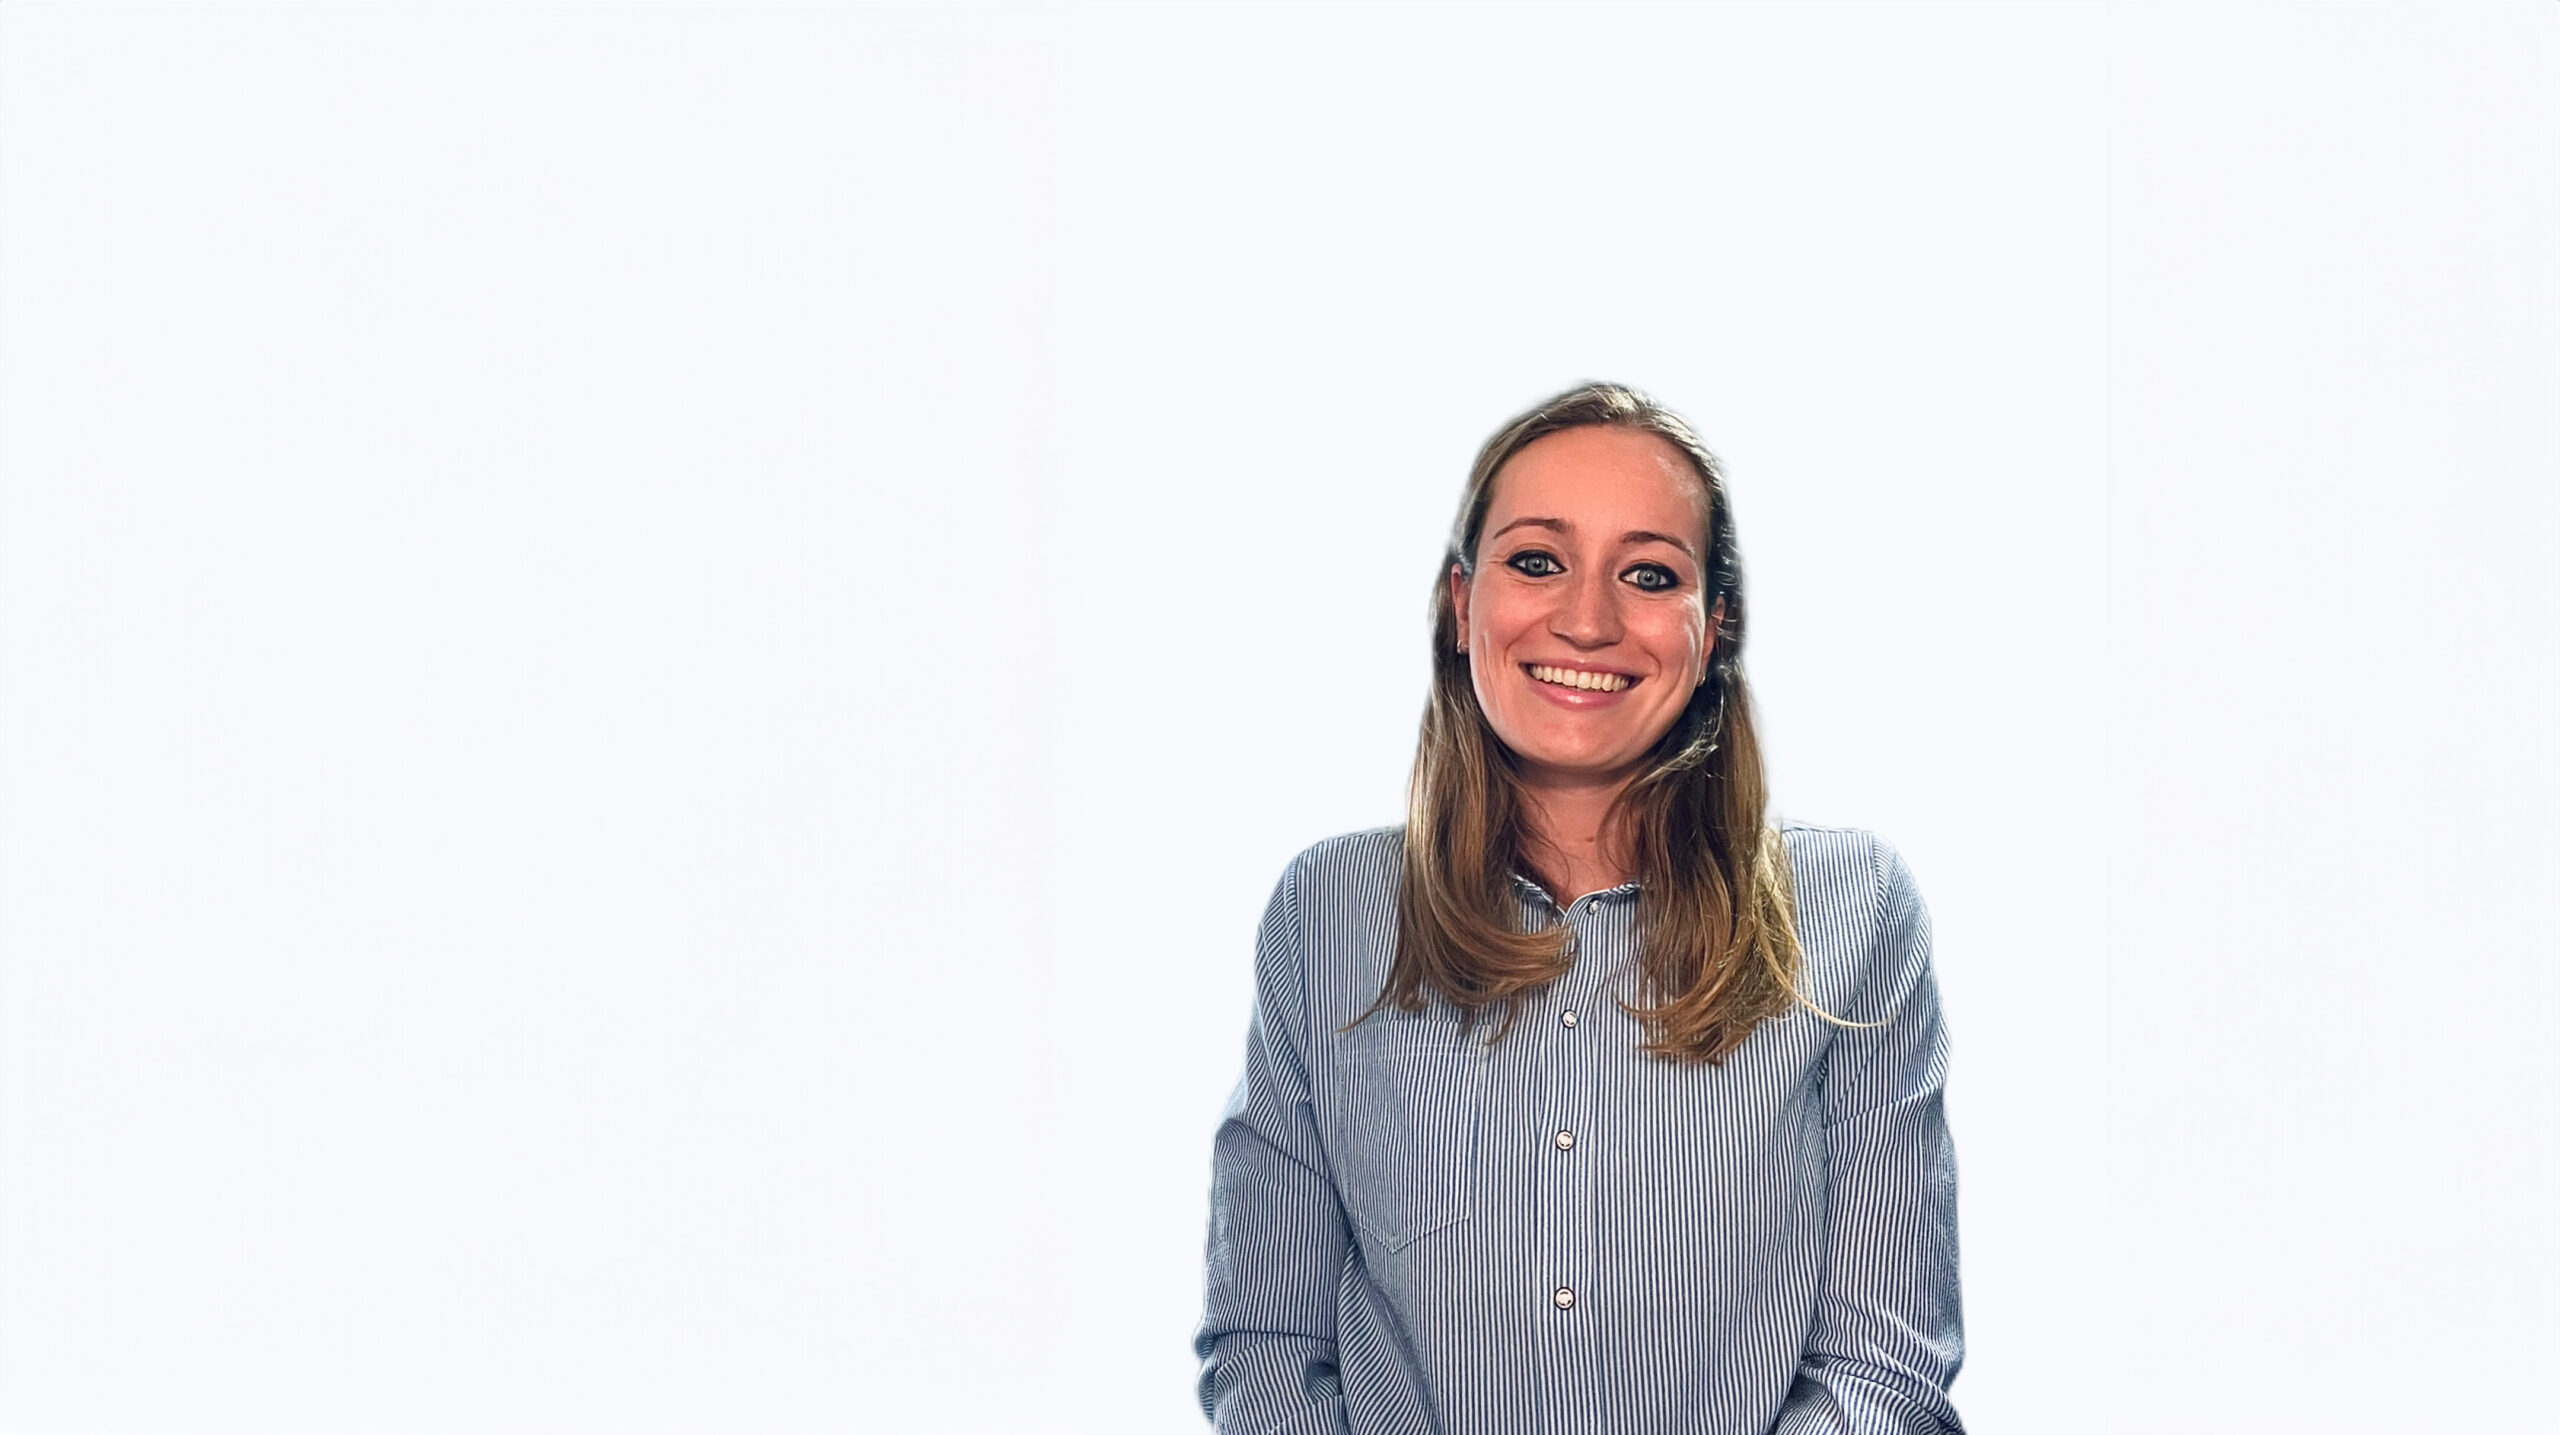 From intern to campaign manager for one of the biggest Dutch brands